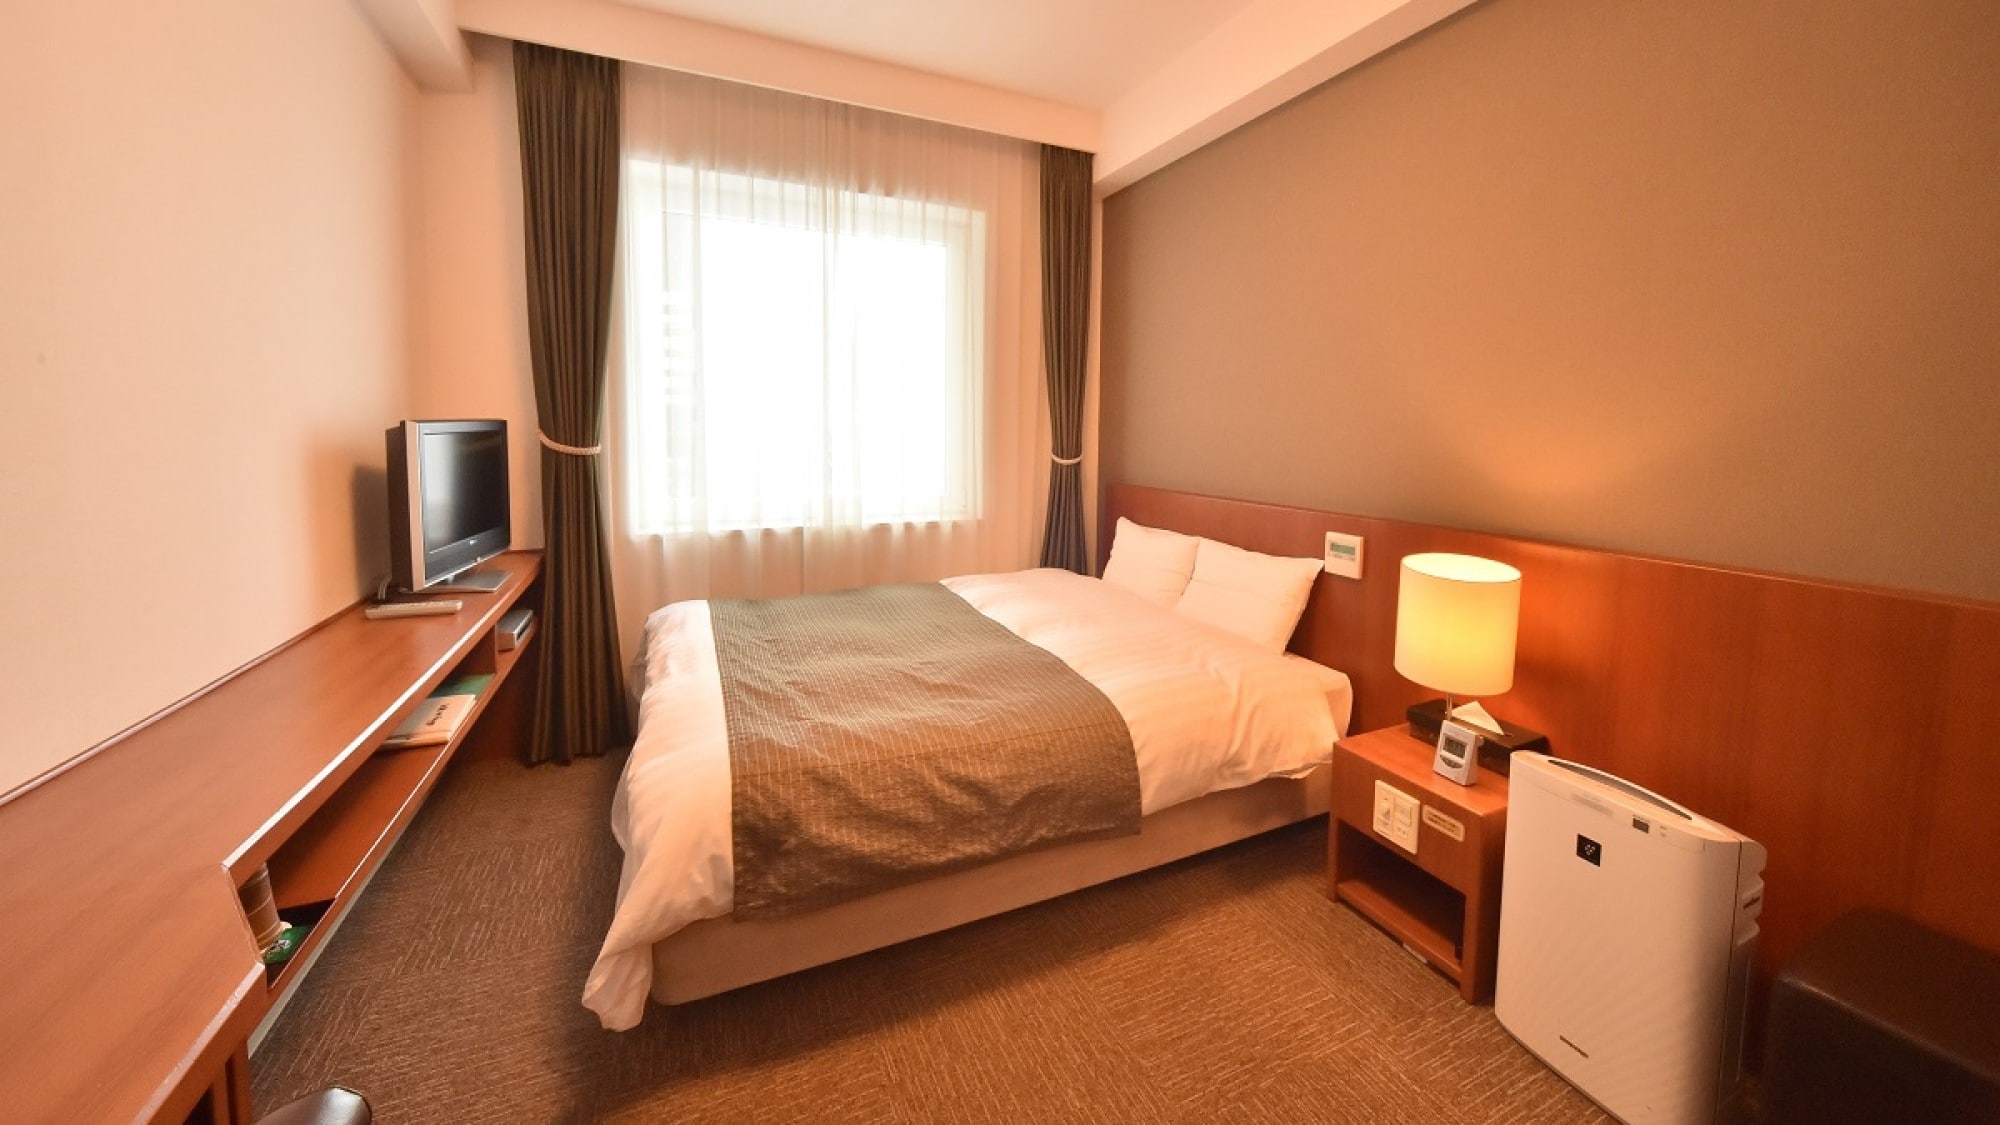 ◆ [Room] Double room Bed size; 140cm & times; 205cm Capacity 1-2 people